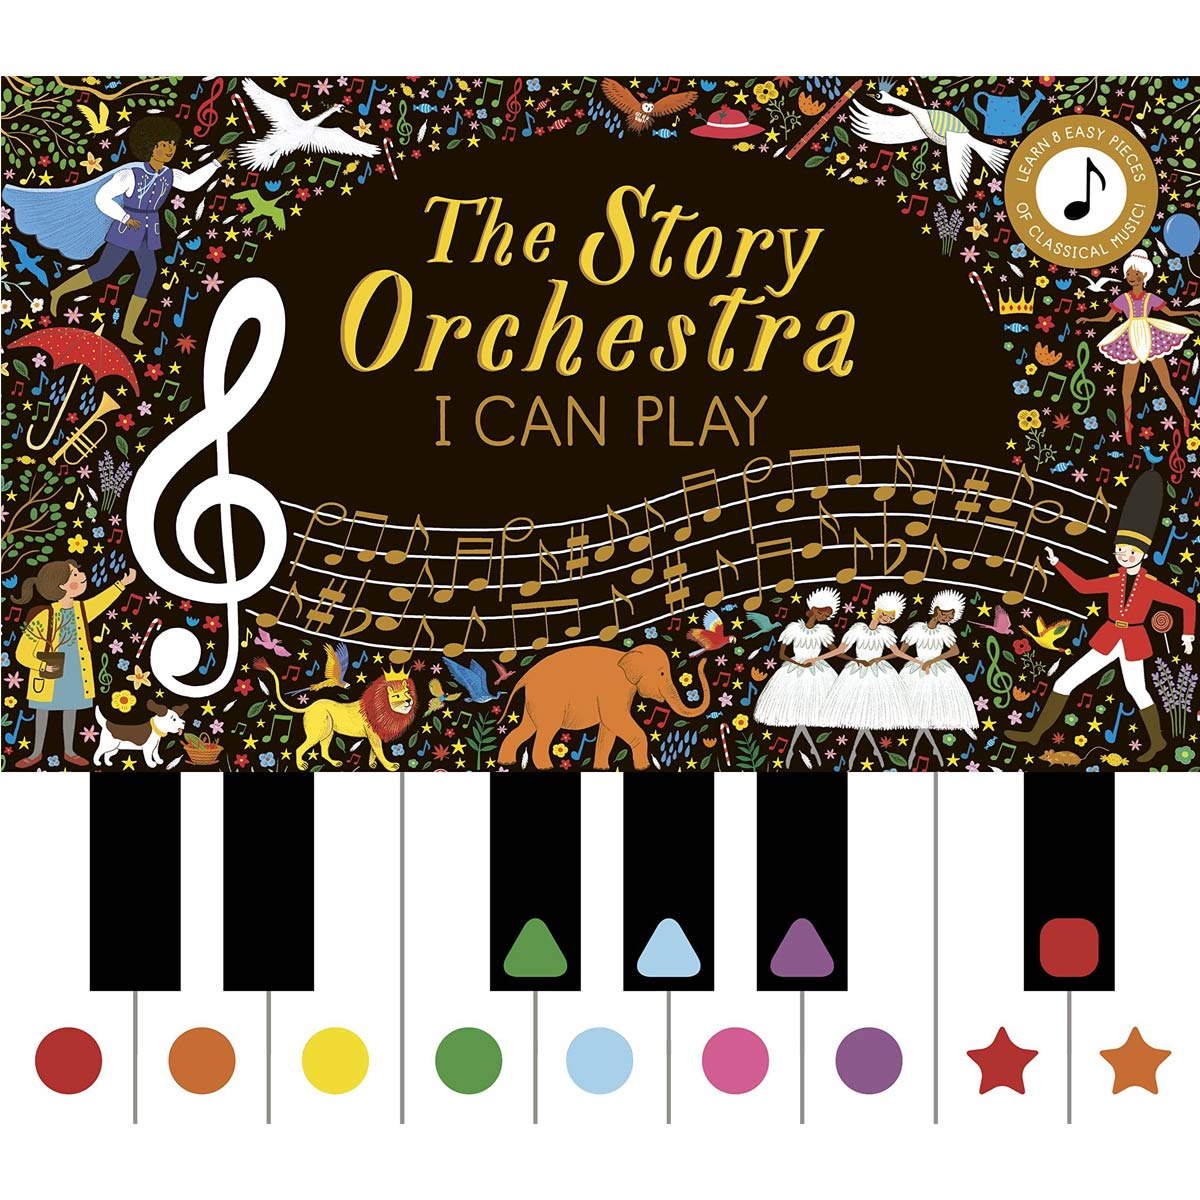 The Story of Orchestra: I Can Play by Jessica Courtney Tickle